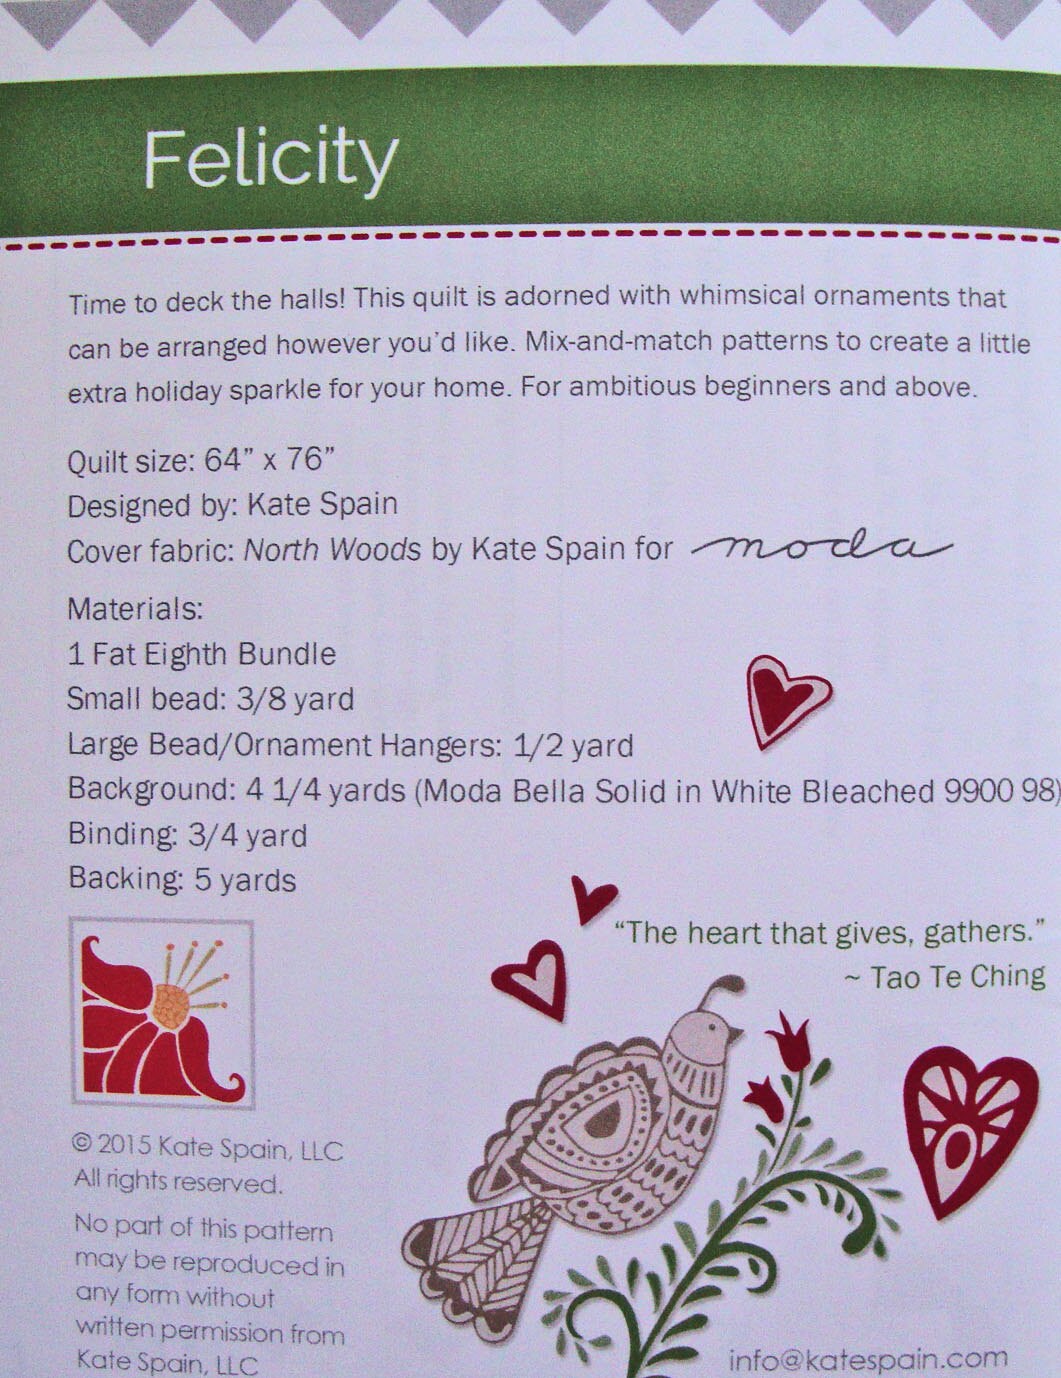 Felicity Quilt Pattern, Kate Spain KS1505, 36 Fat Eighths F8 Friendly Quilt Pattern, Christmas Xmas Ornaments Quilt Pattern